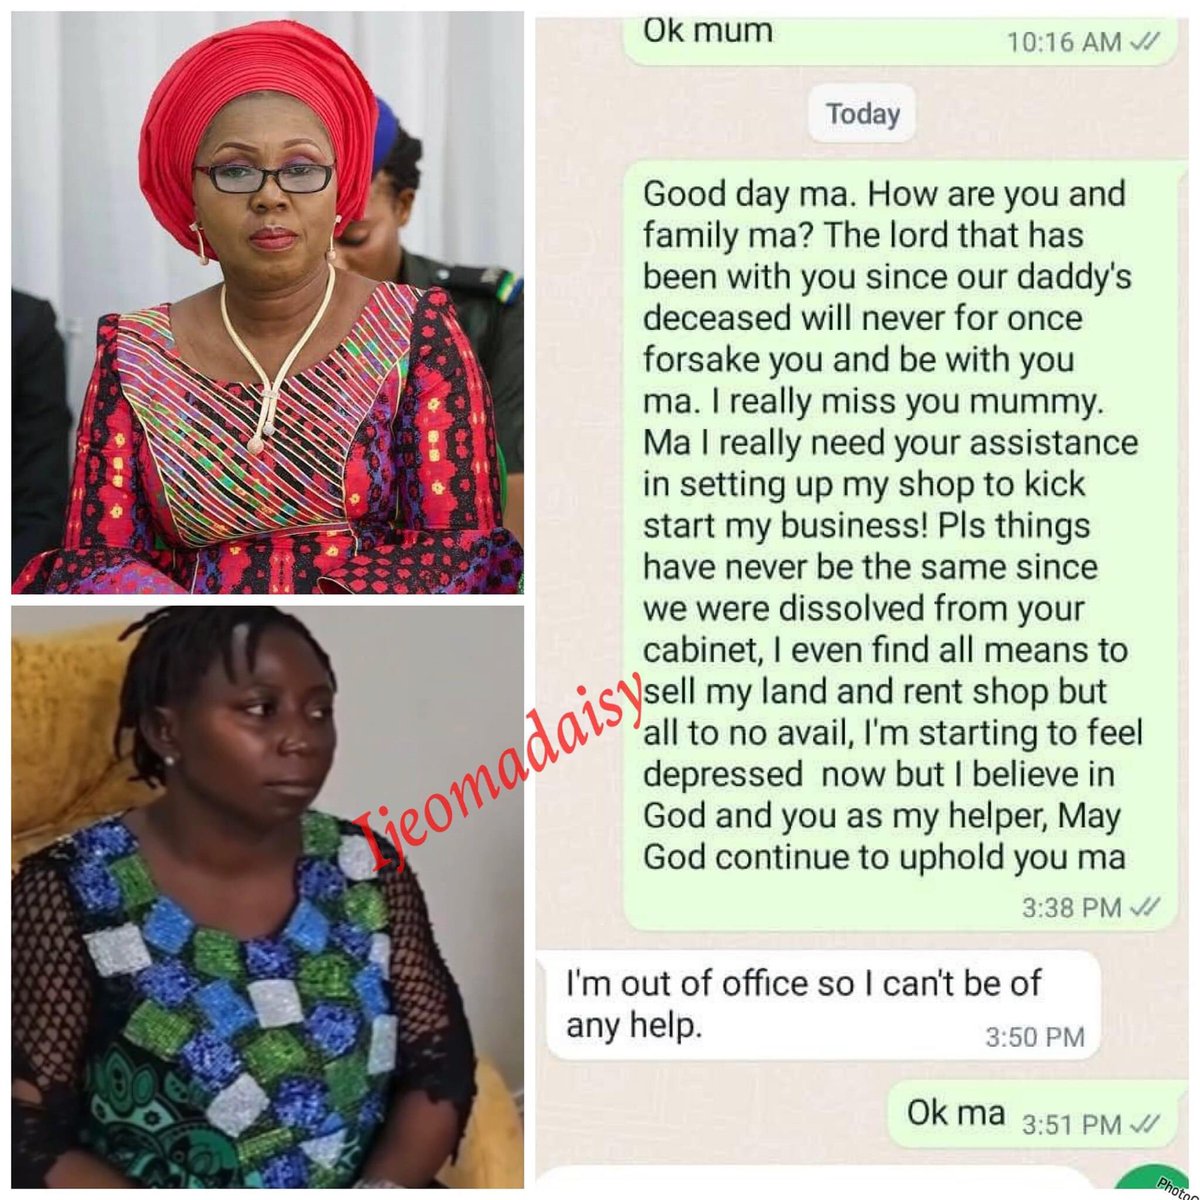 Alleged conversation between Former First Lady of Ondo State, Betty Akeredolu, and her former staff - Ijeomadaisy